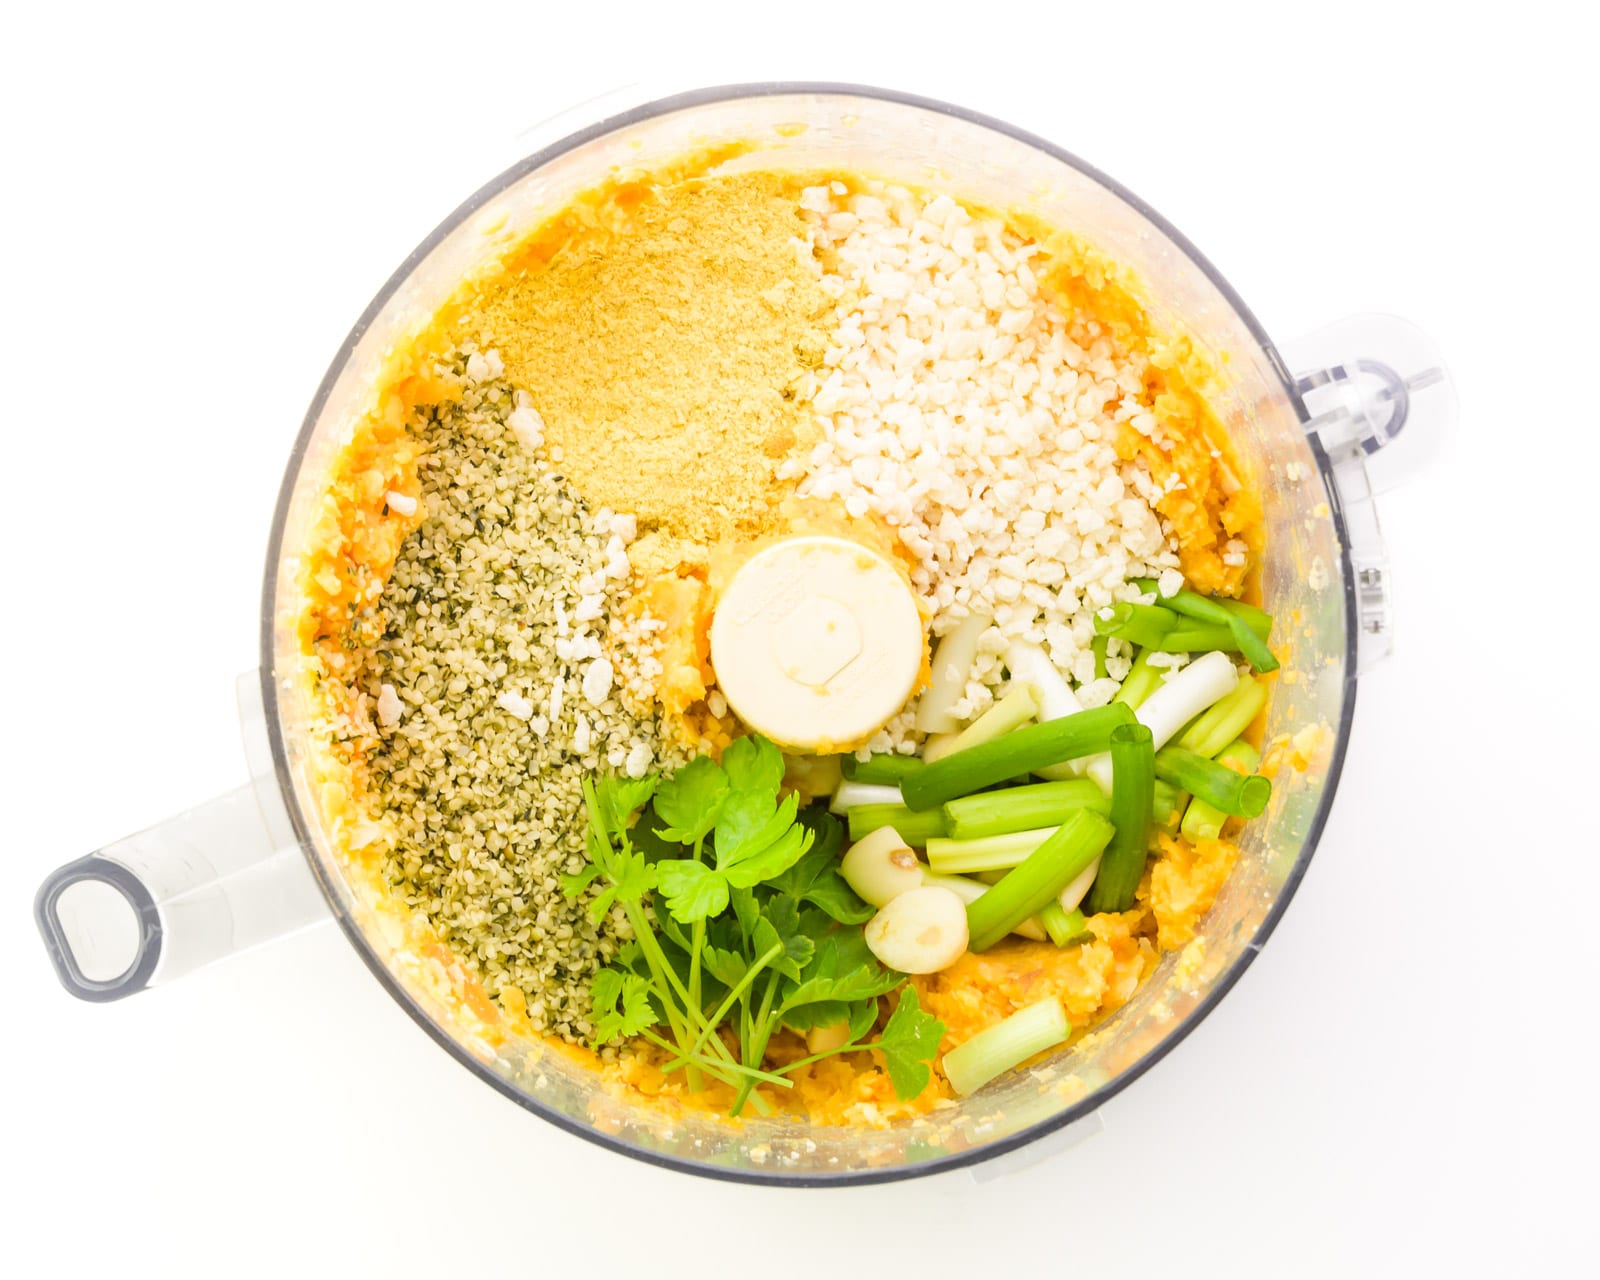 Ingredients are in the bottom of a food processor, including hemp seeds, fresh herbs, breadcrumbs, and more.